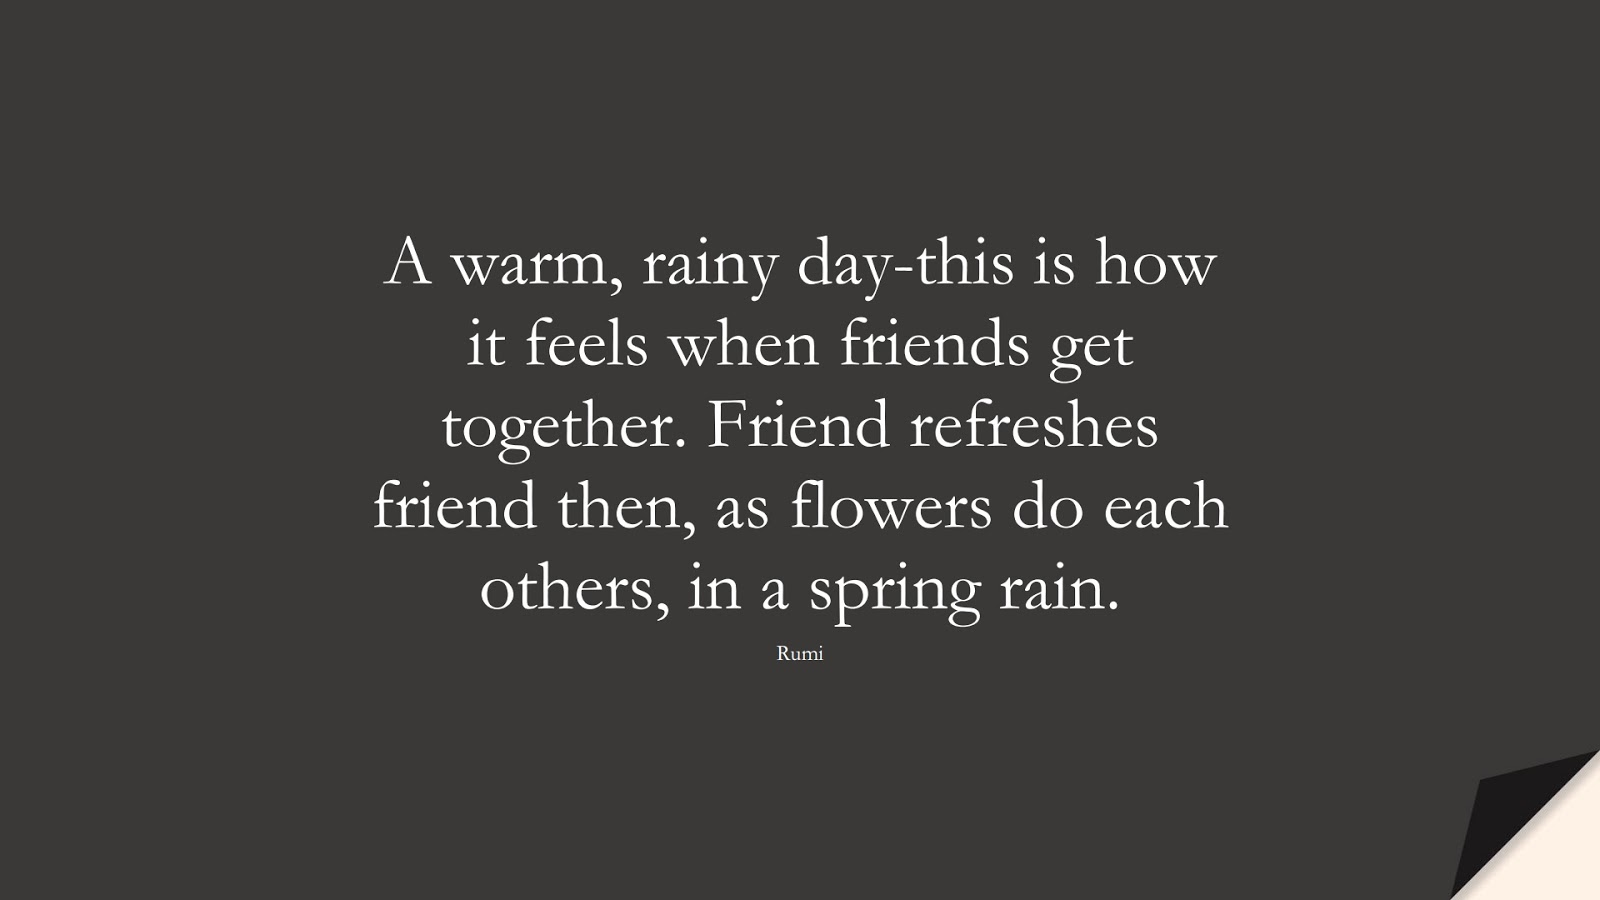 A warm, rainy day-this is how it feels when friends get together. Friend refreshes friend then, as flowers do each others, in a spring rain. (Rumi);  #RumiQuotes